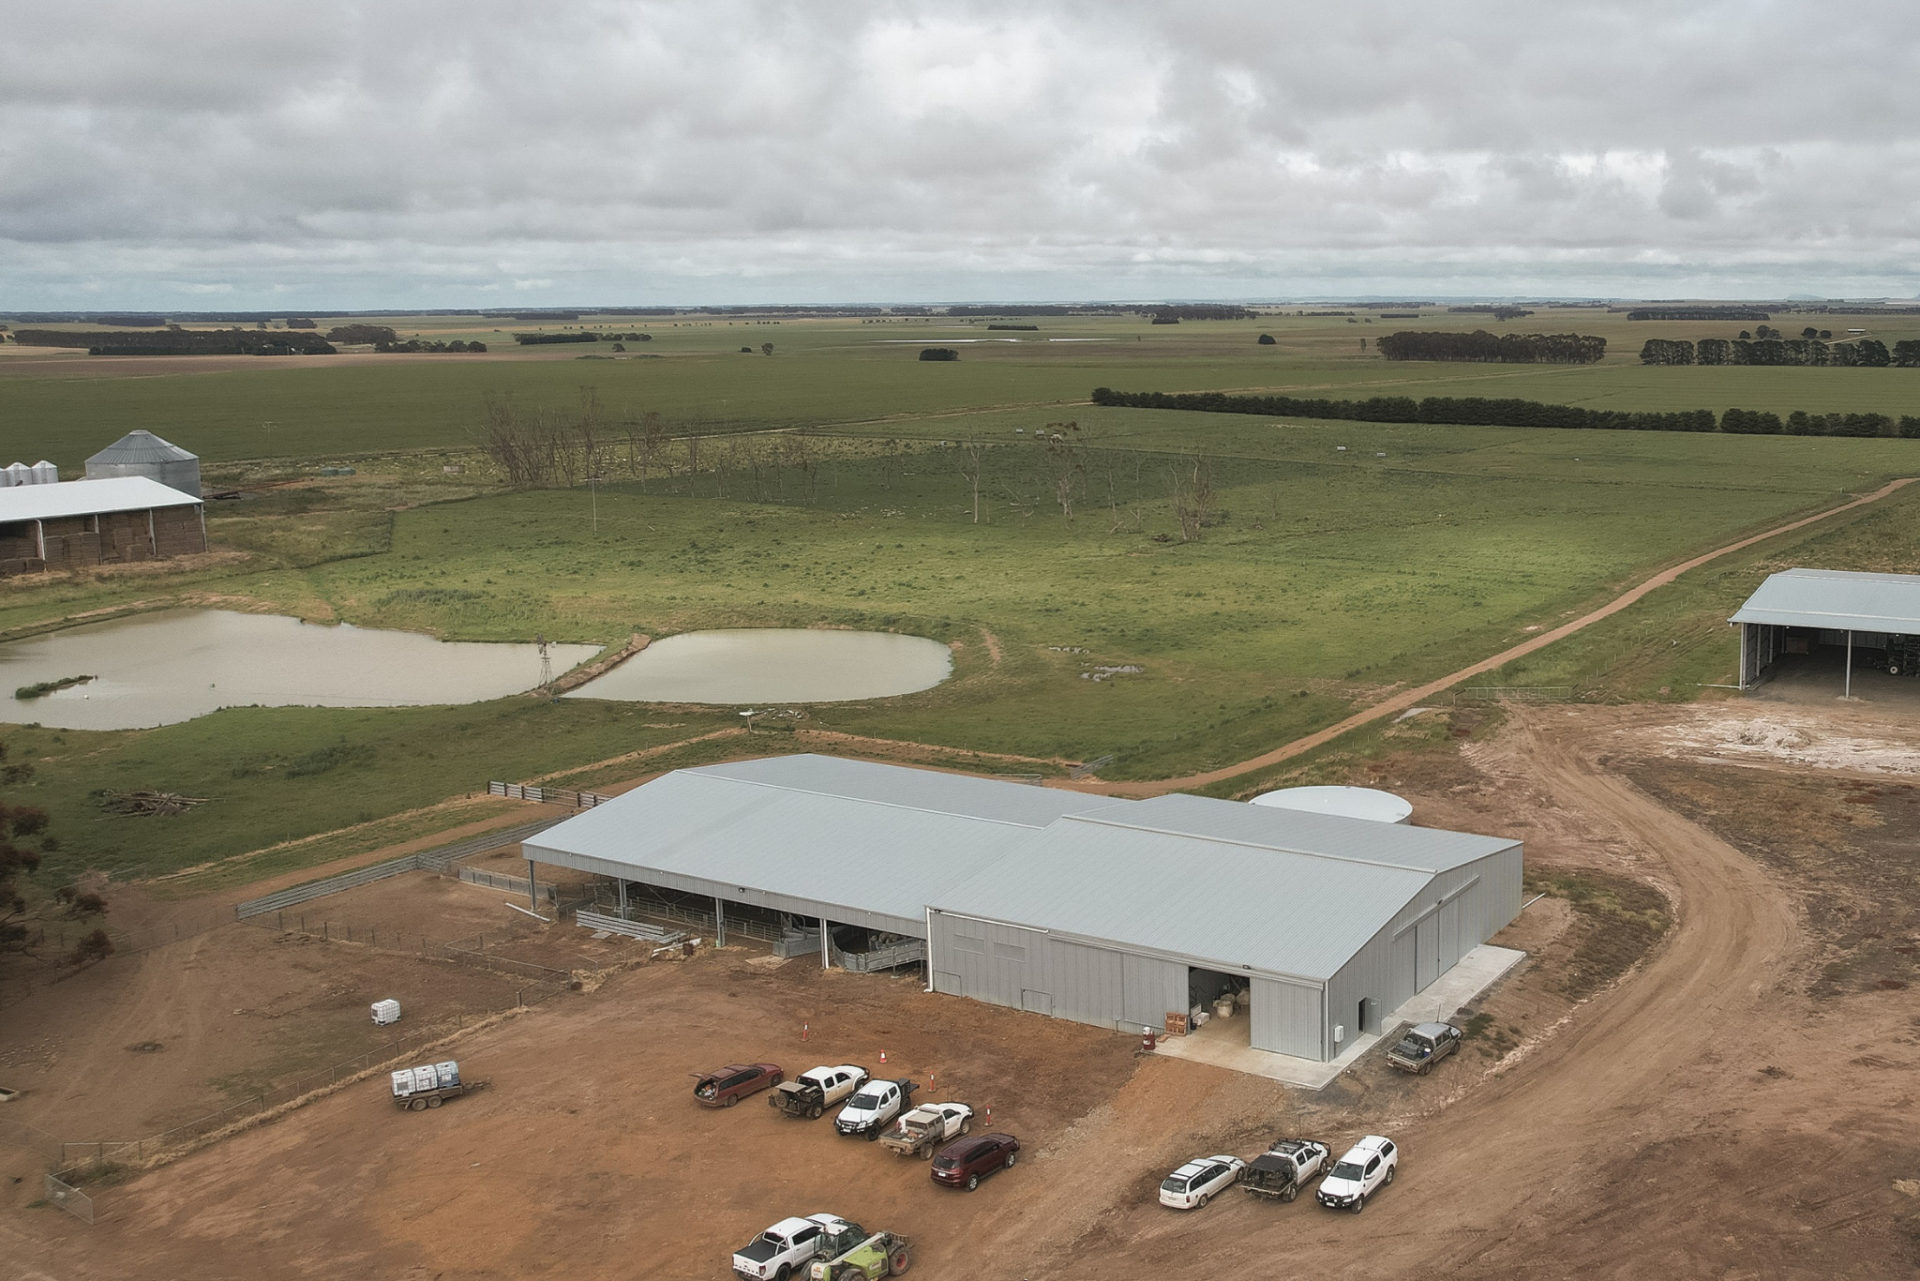 You are currently viewing 59.5m x 27m x 5.1m shearing shed complex